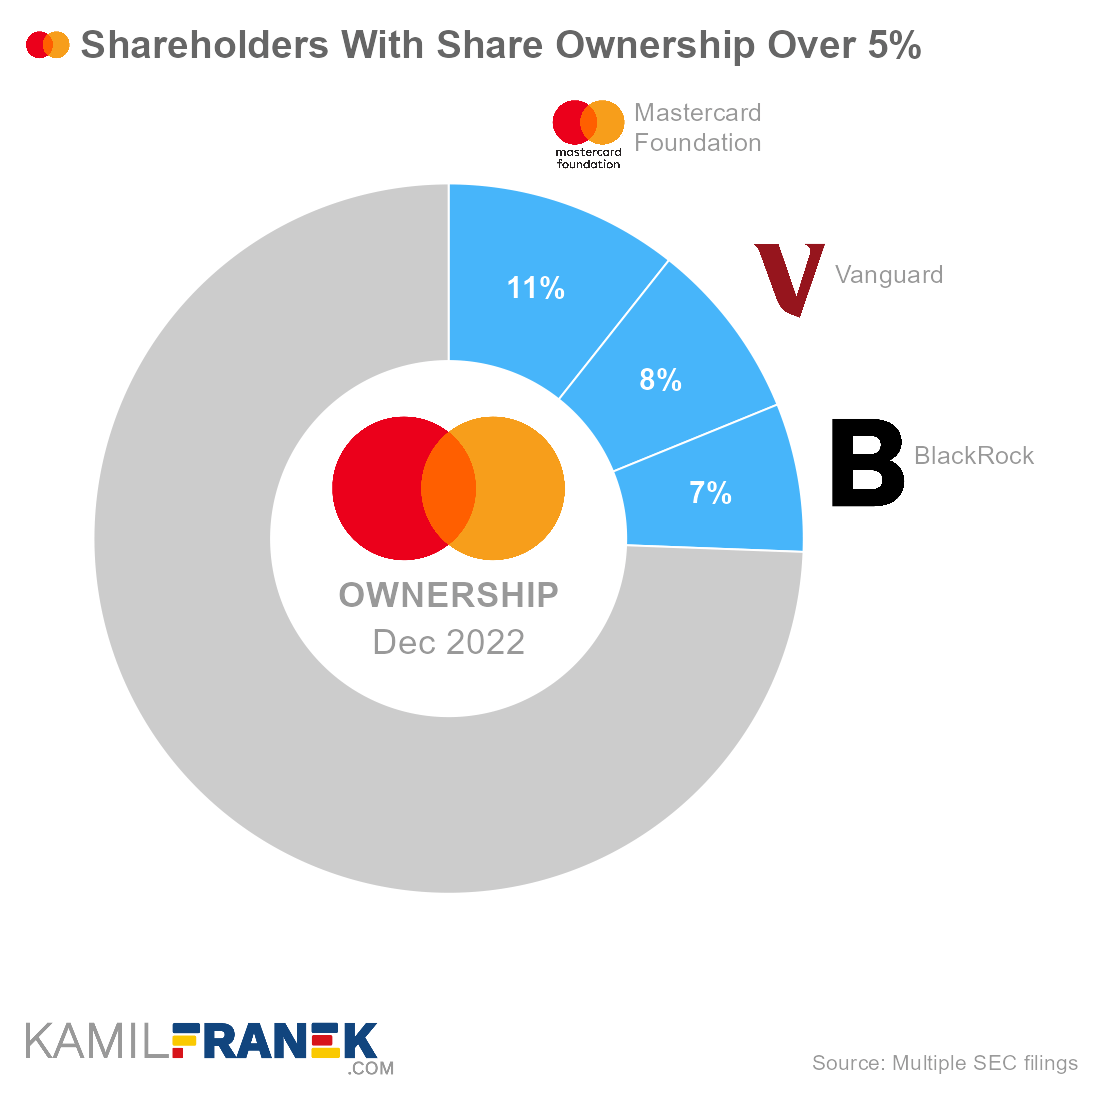 Who owns Mastercard, largest shareholders donut chart